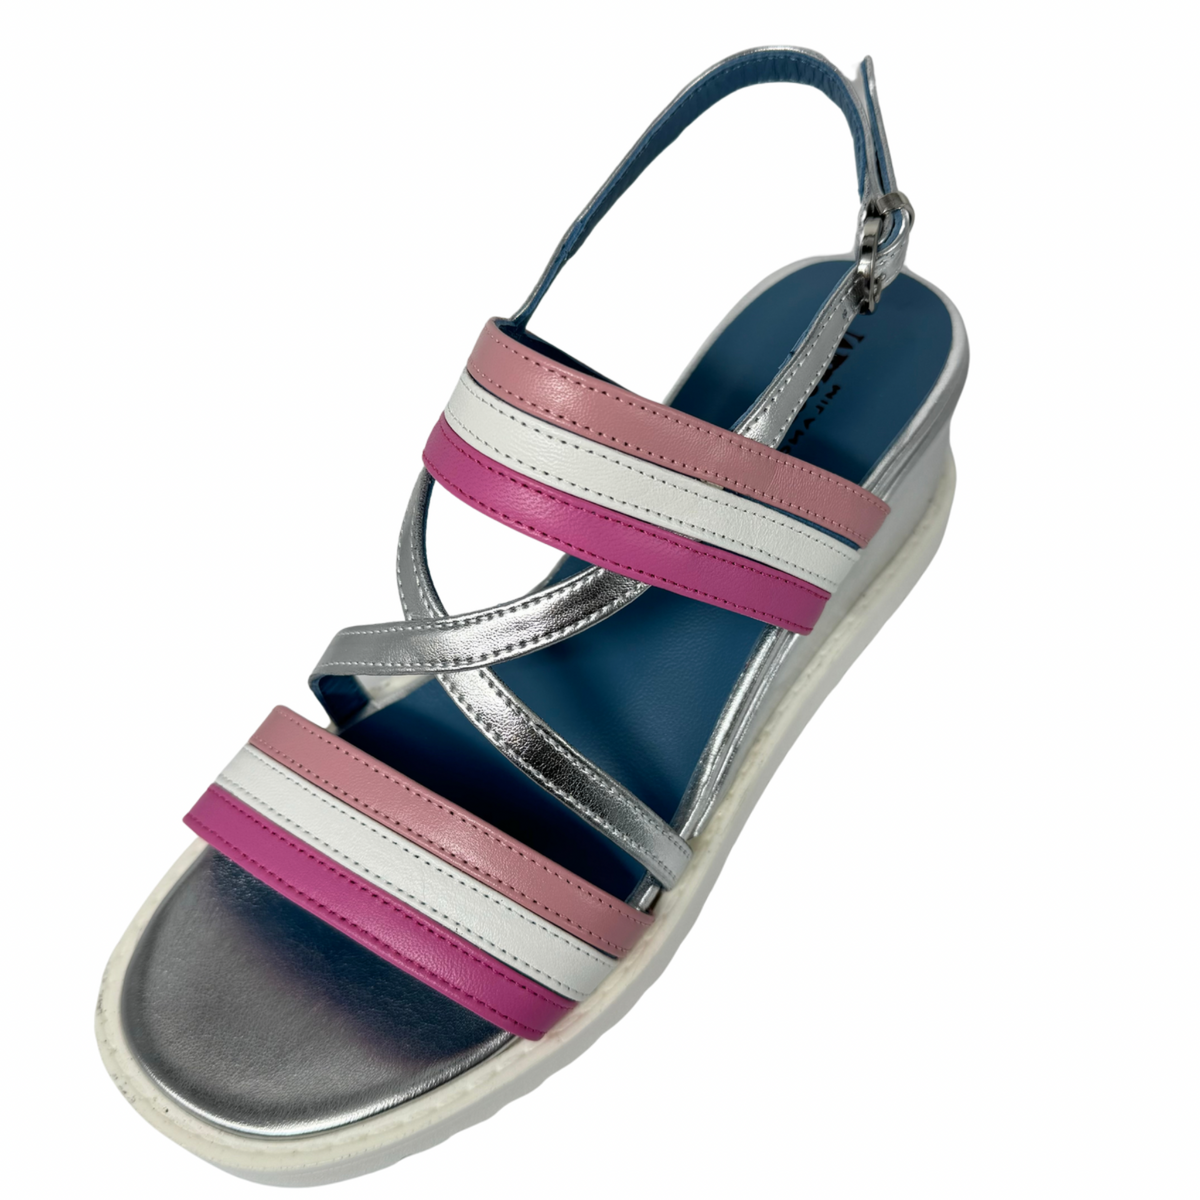 Marco Moreo Silver and Pink Wedge Sandals